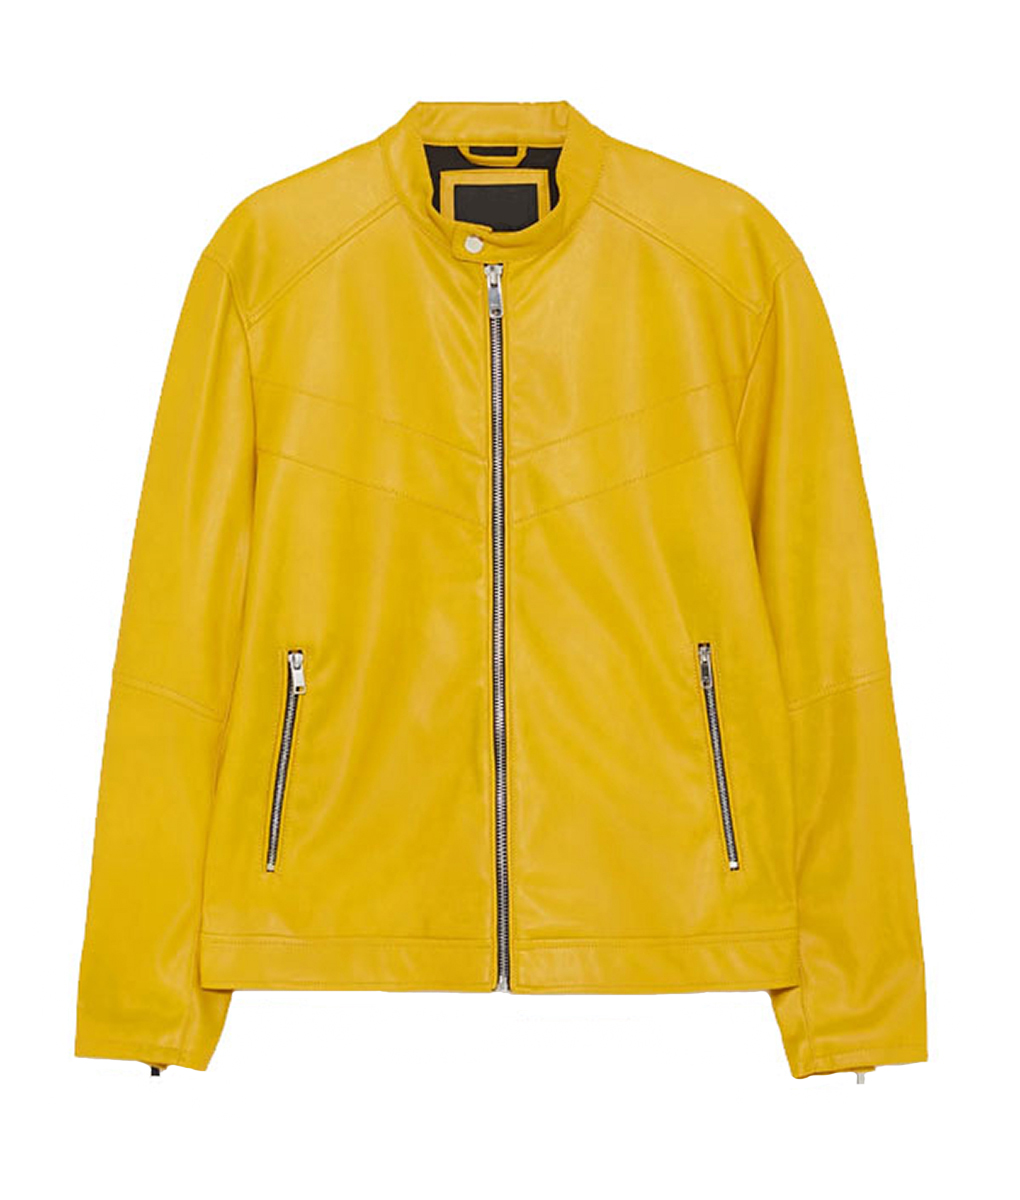 Men's Classic Yellow Leather Jacket